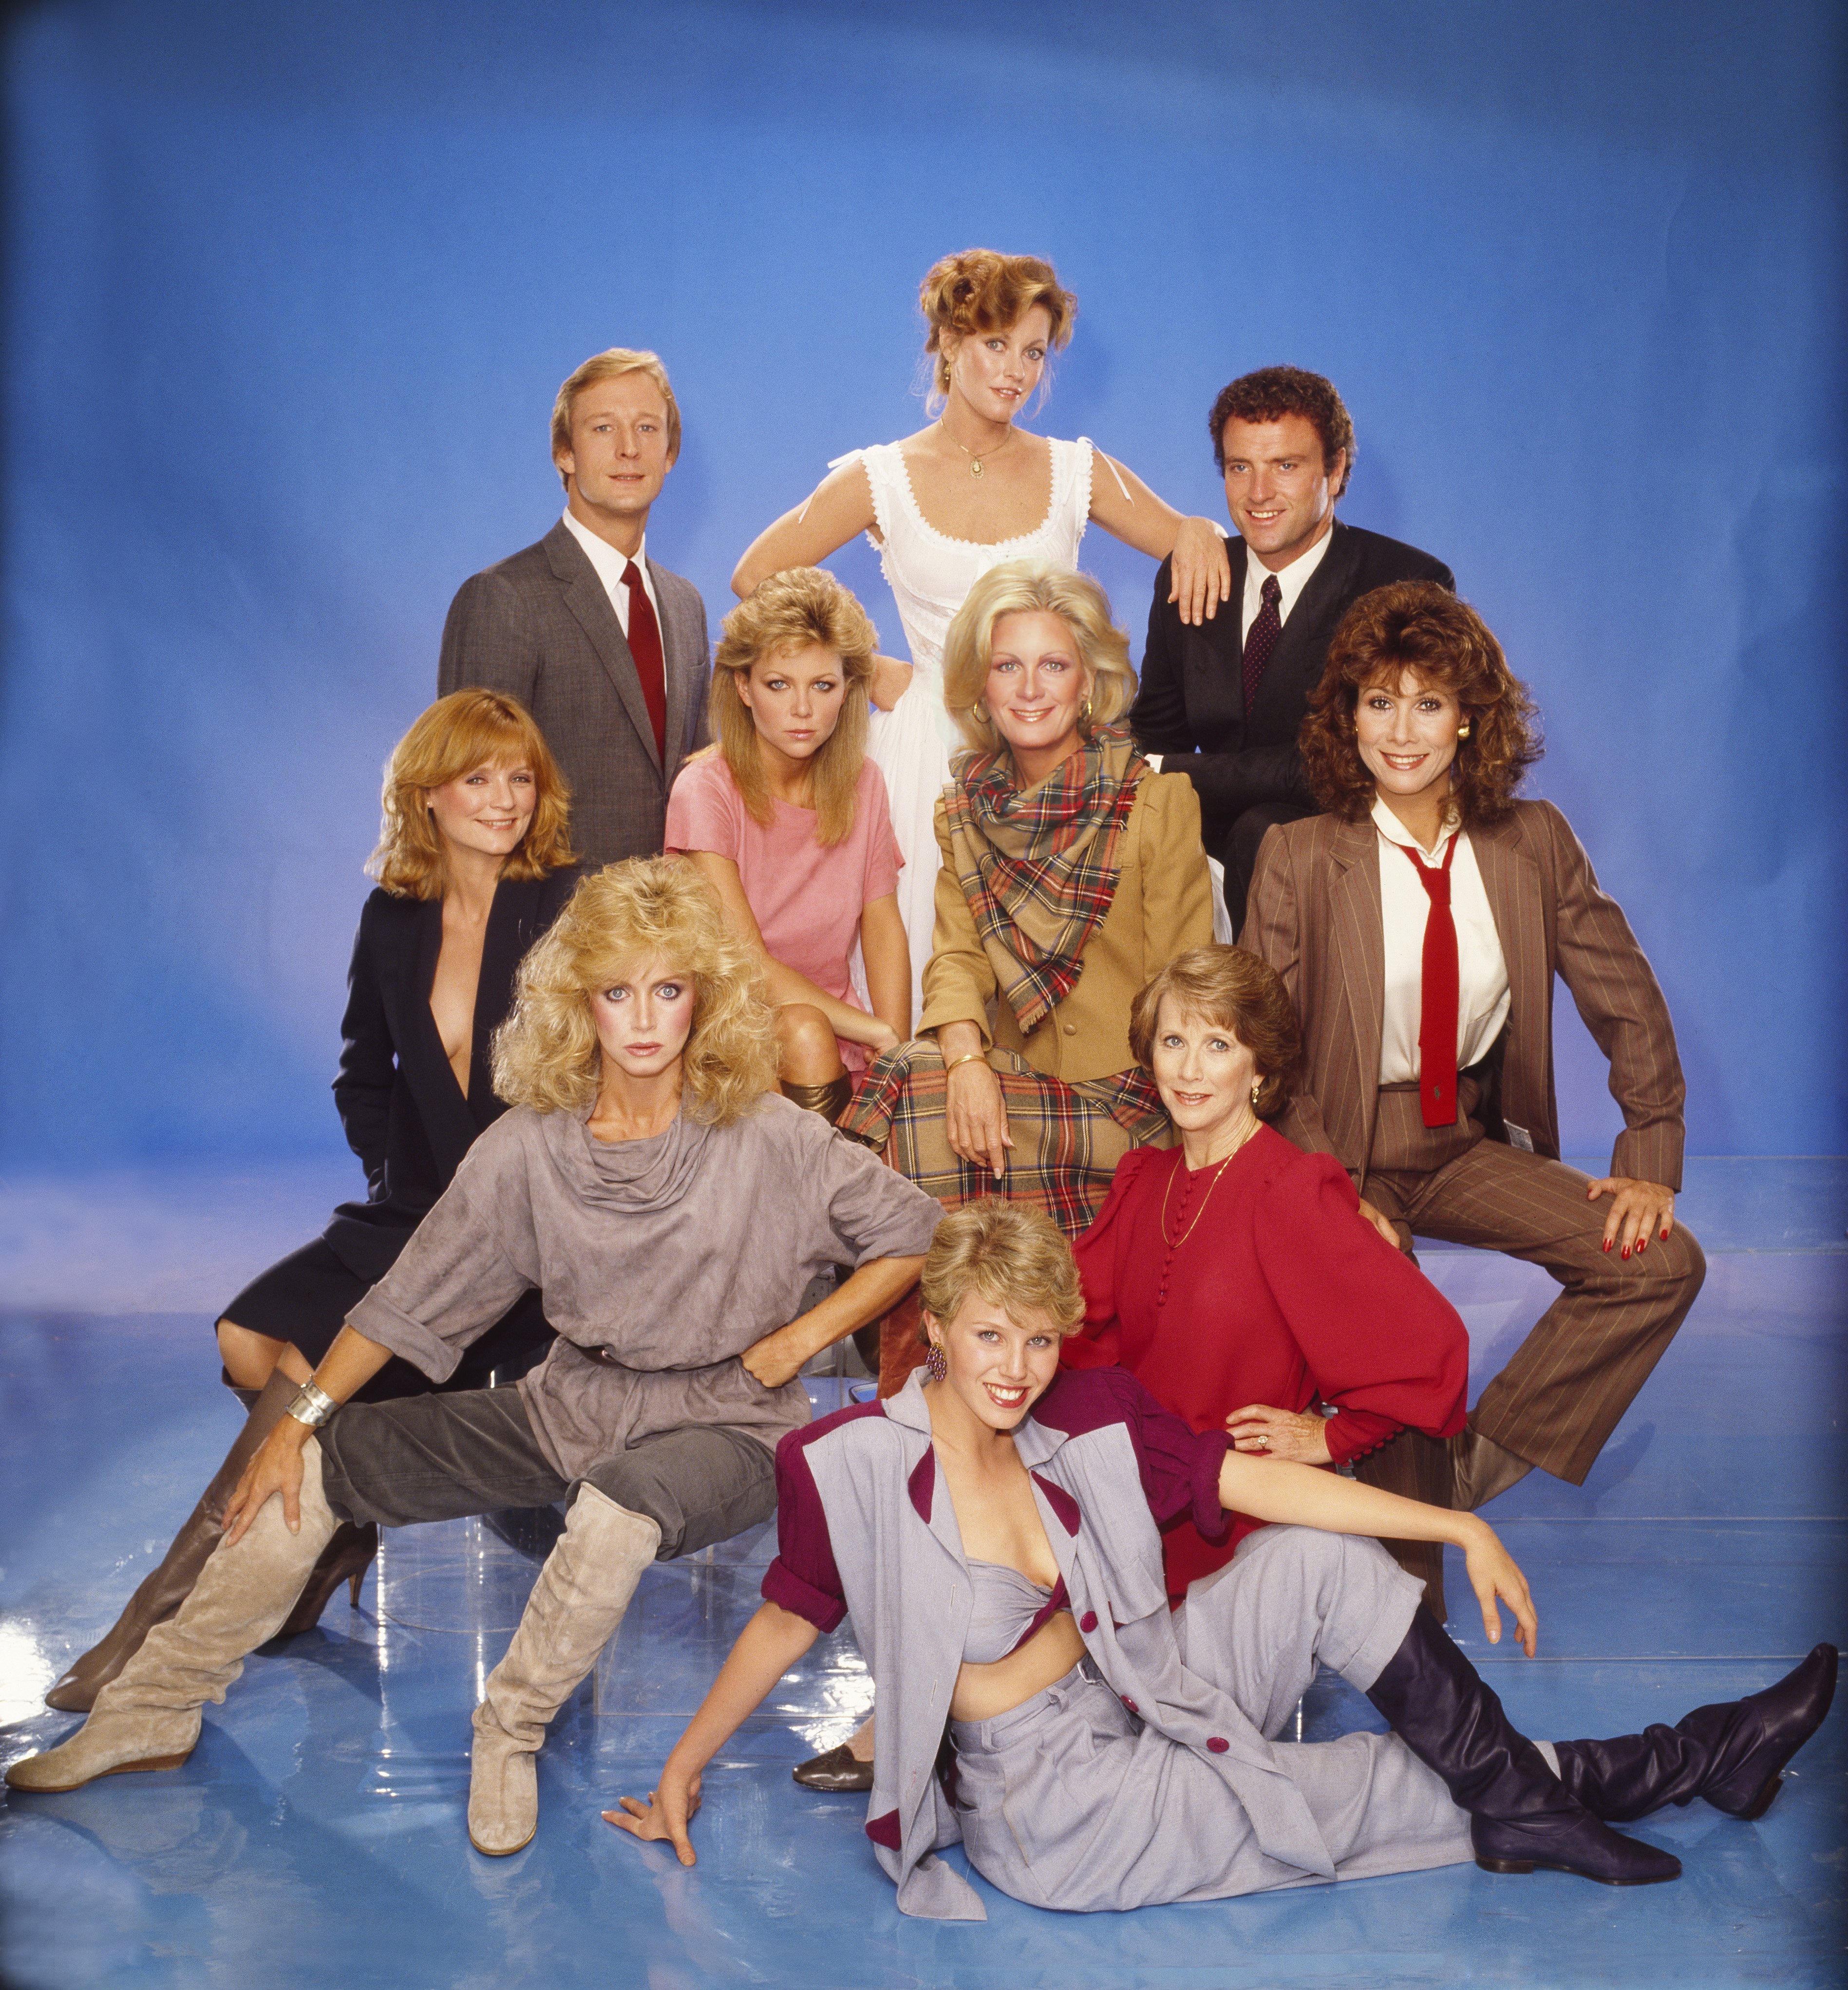 Cast of "Knots Landing" pose for a portrait in Los Angeles, California, in 1982. | Source: Getty Images